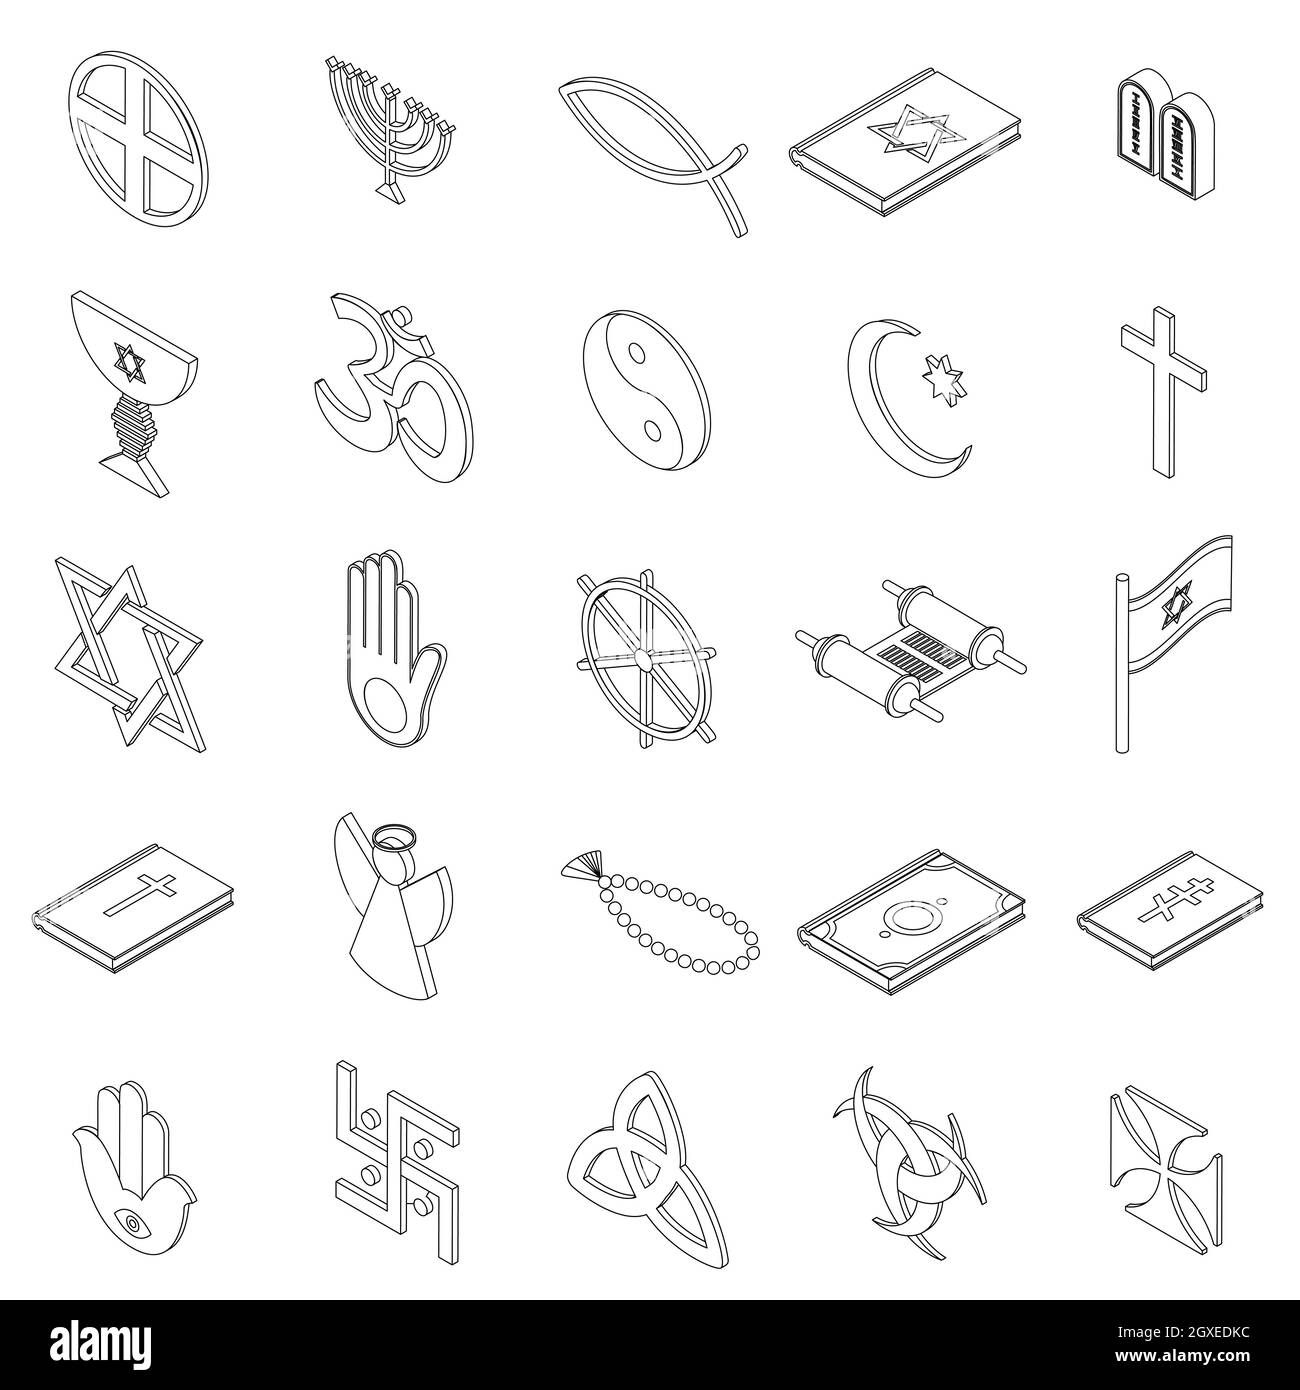 Religious symbols icons set in isometric 3d style on a white background Stock Photo